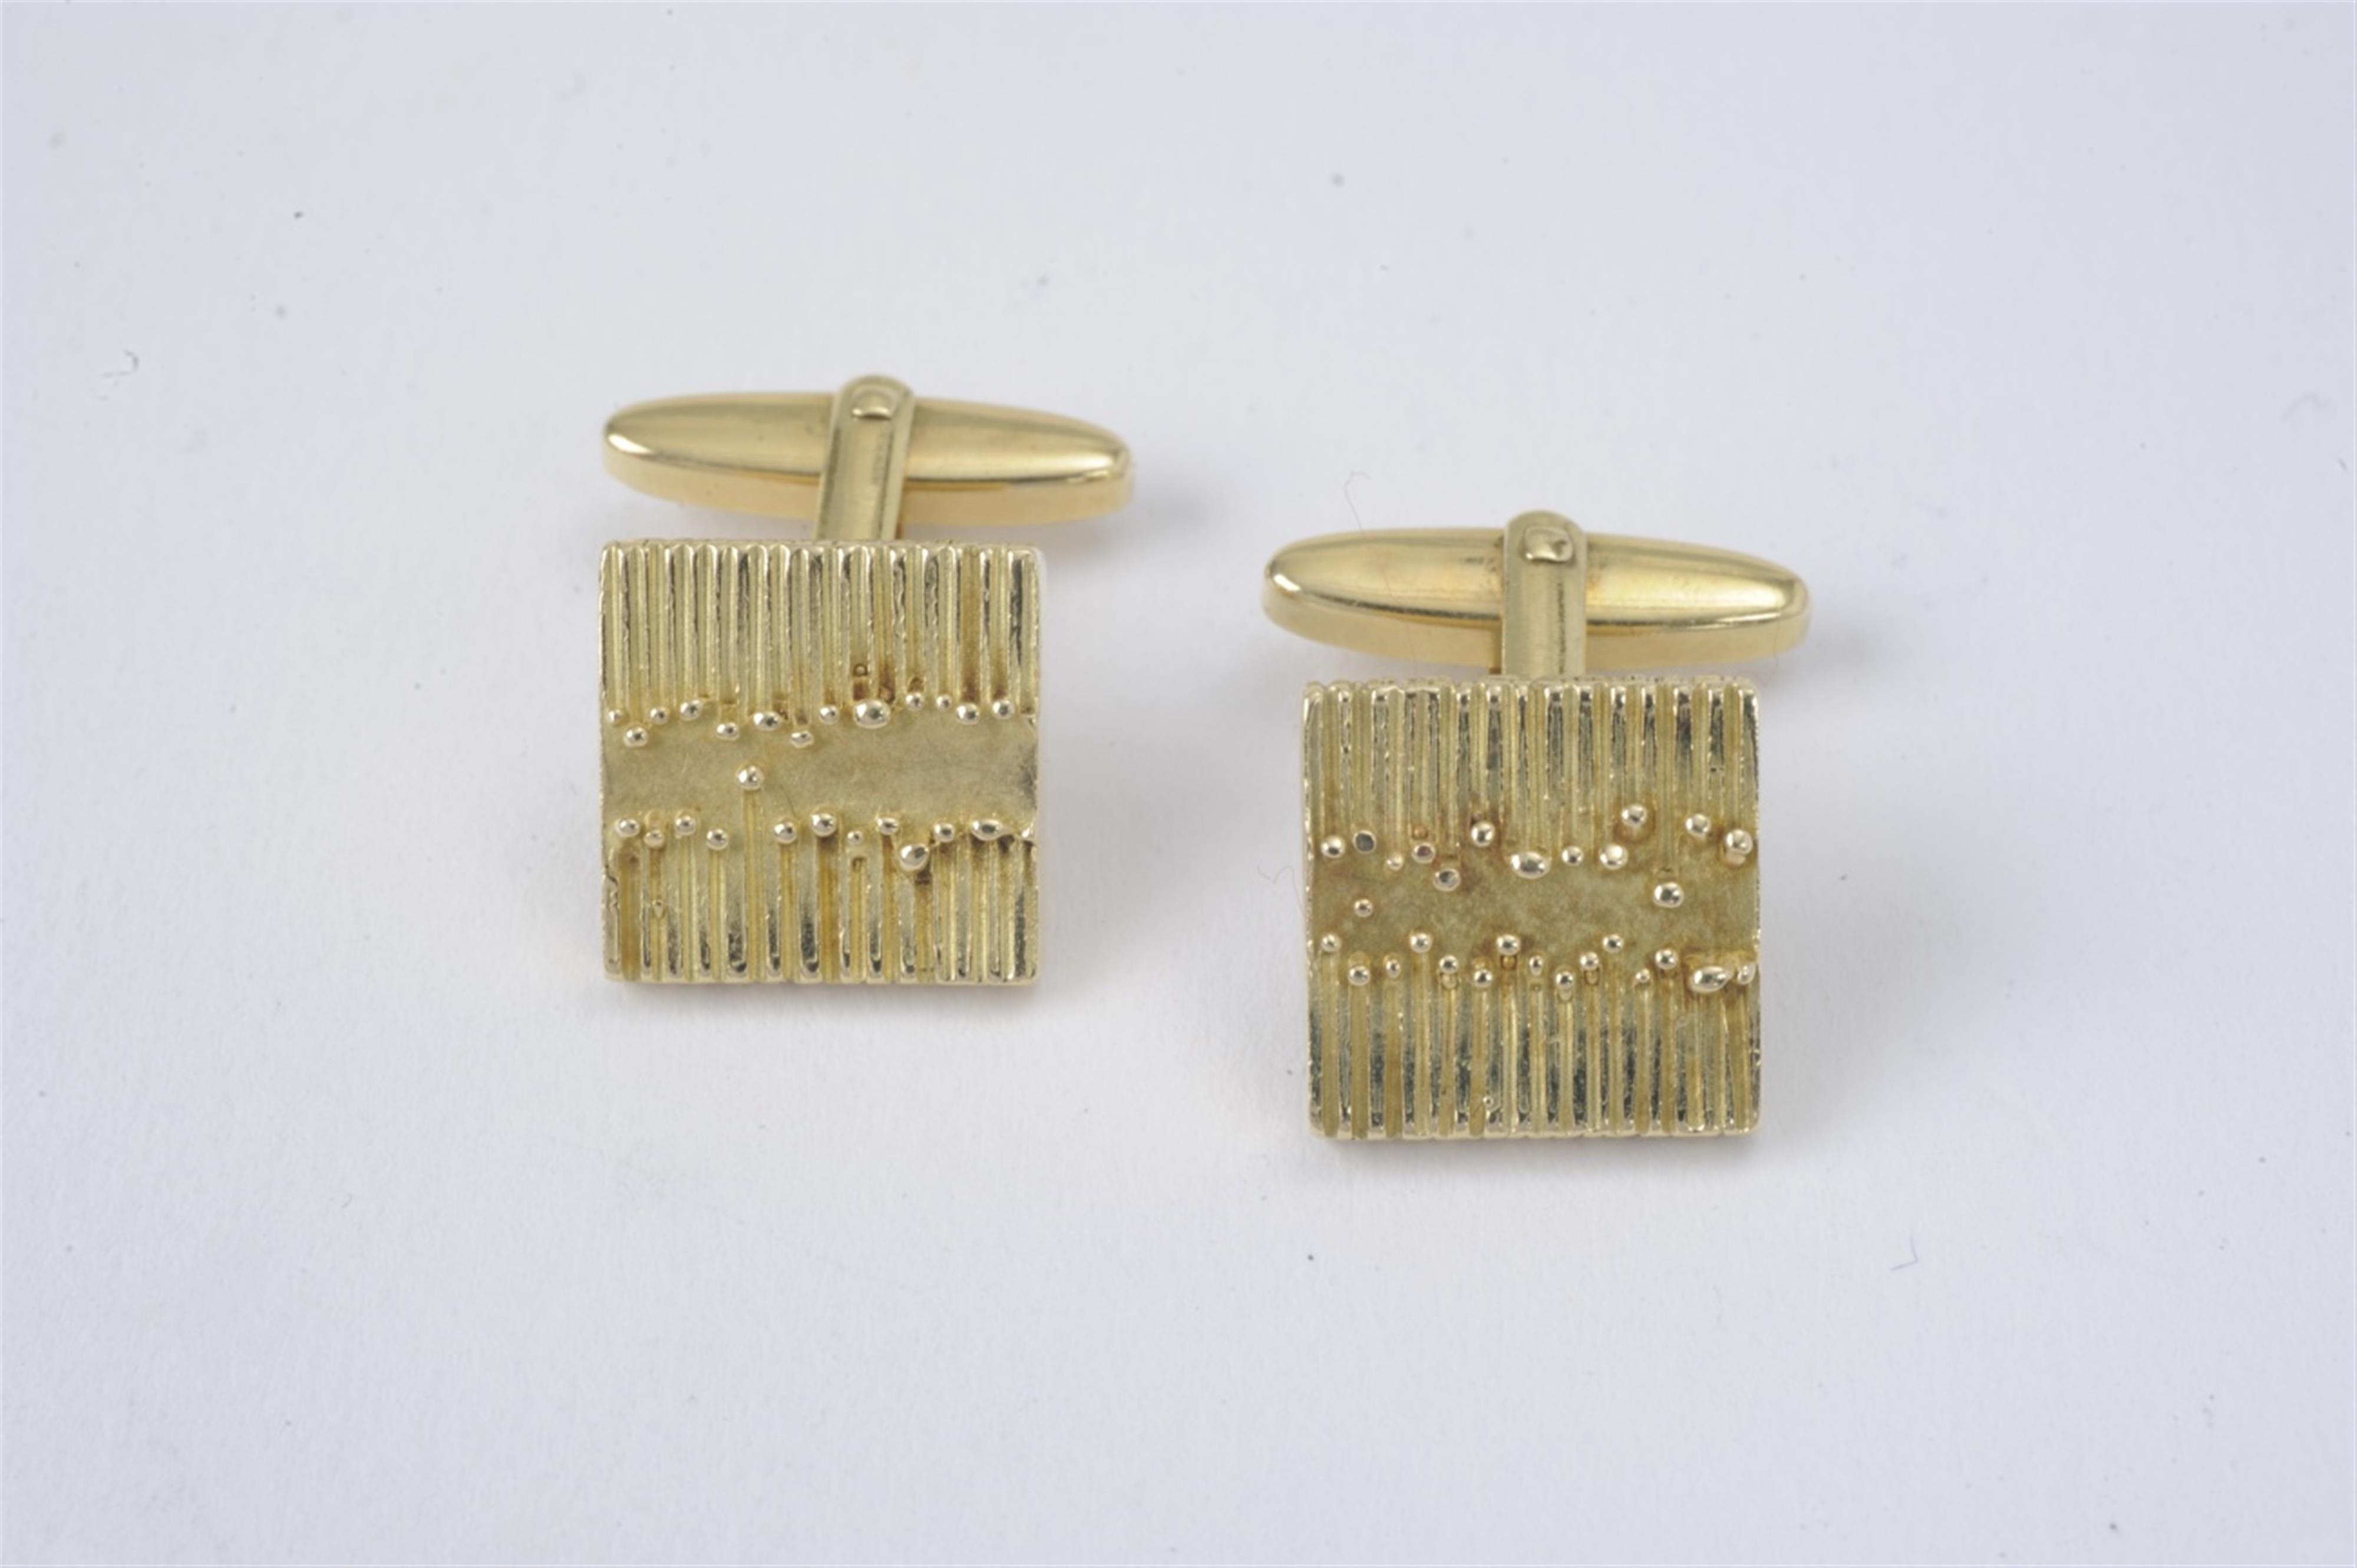 A pair of 18k gold cufflinks with relief decor by John & Ursula Parry - image-2